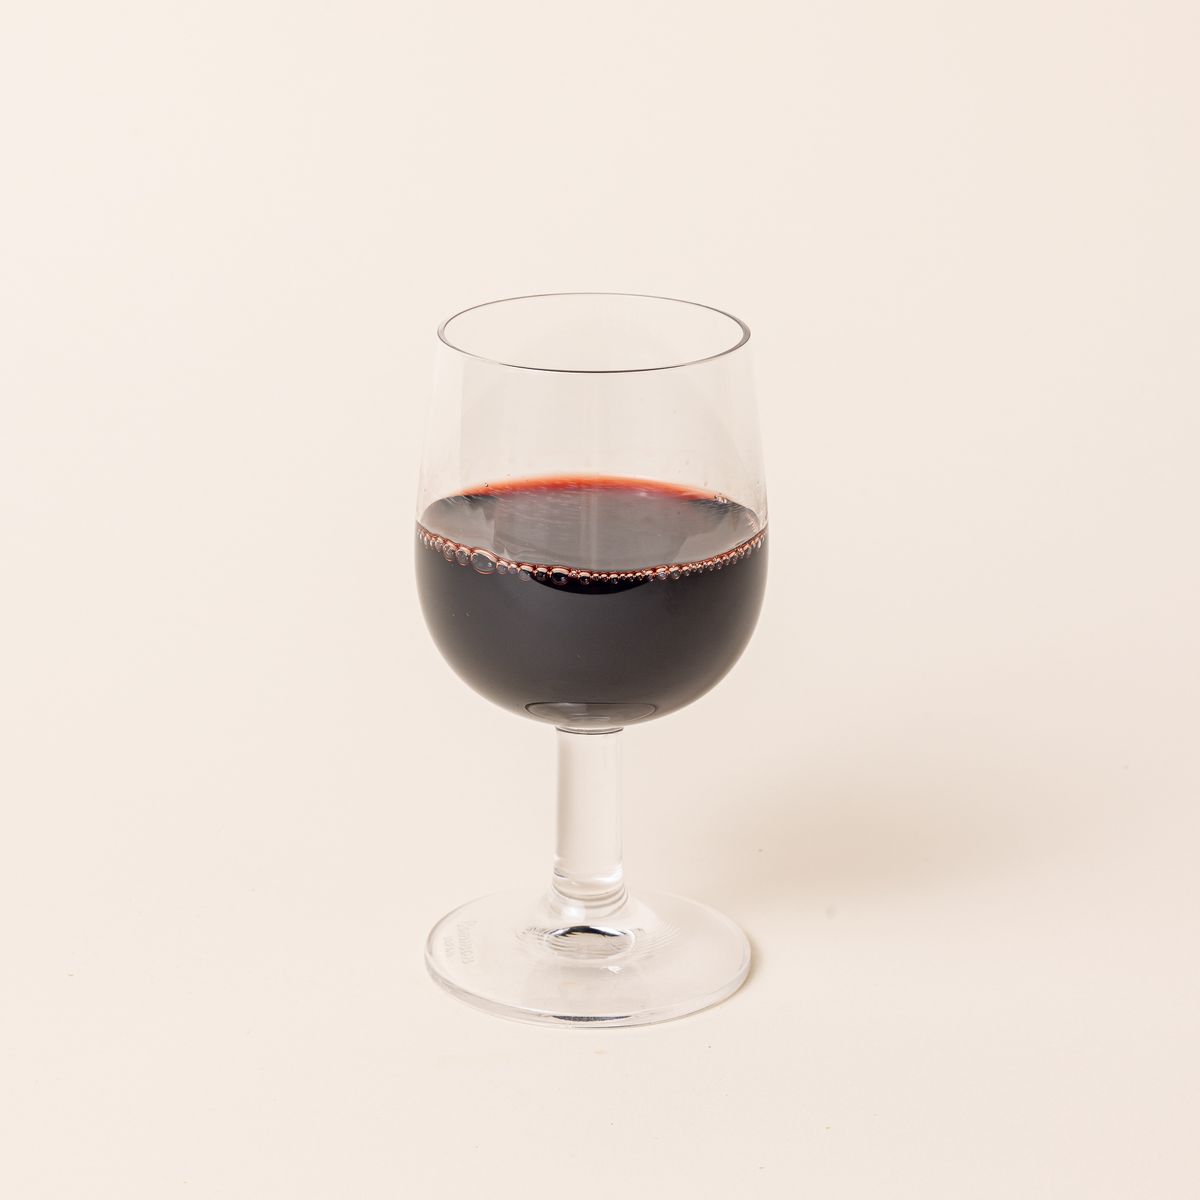 A clear wine glass with a short stem and wide cup, filled with red wine.